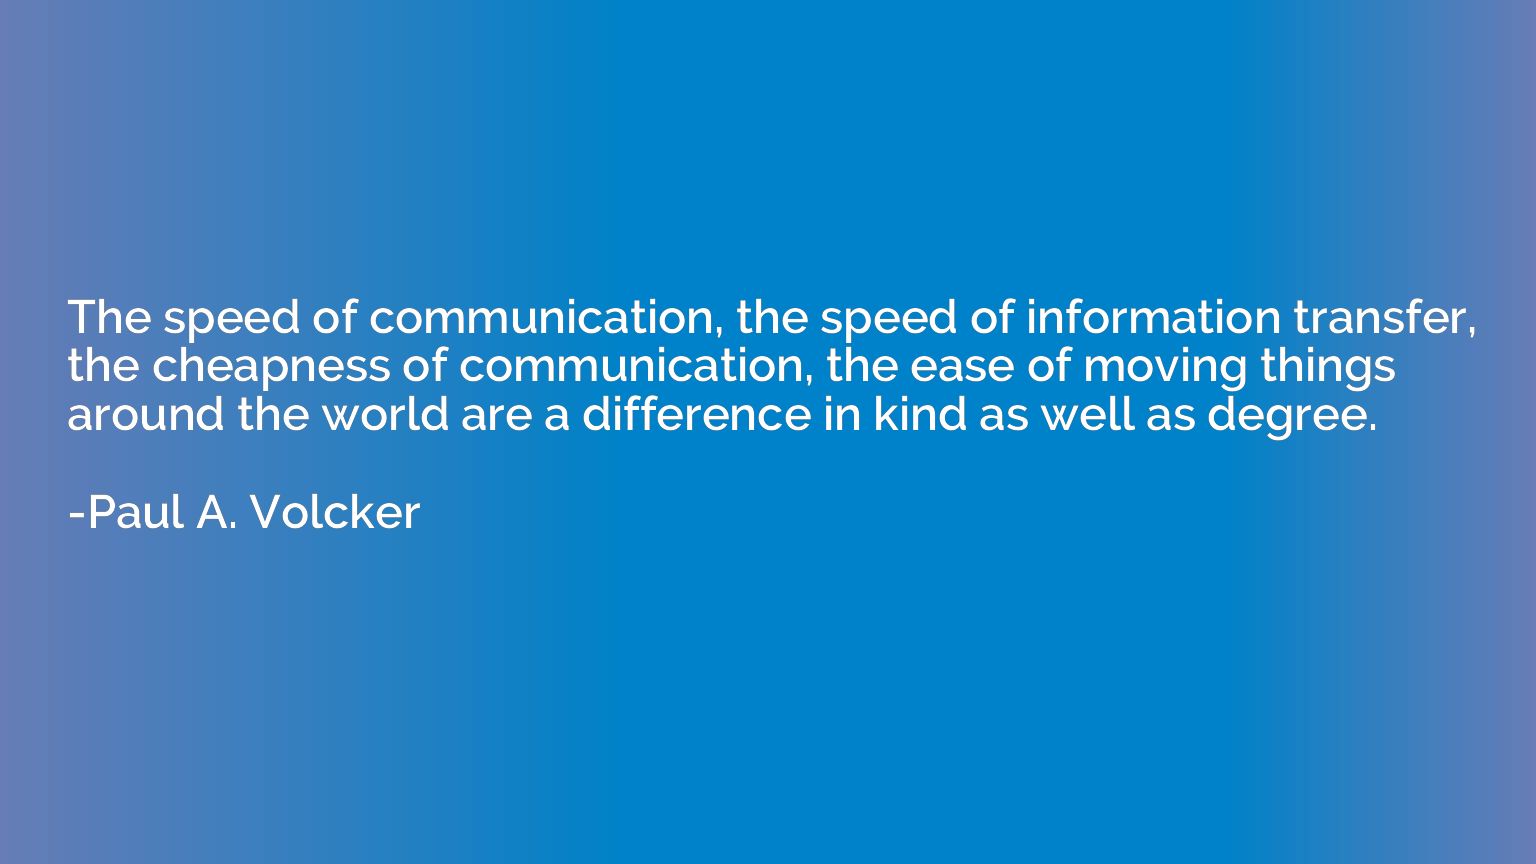 The speed of communication, the speed of information transfe